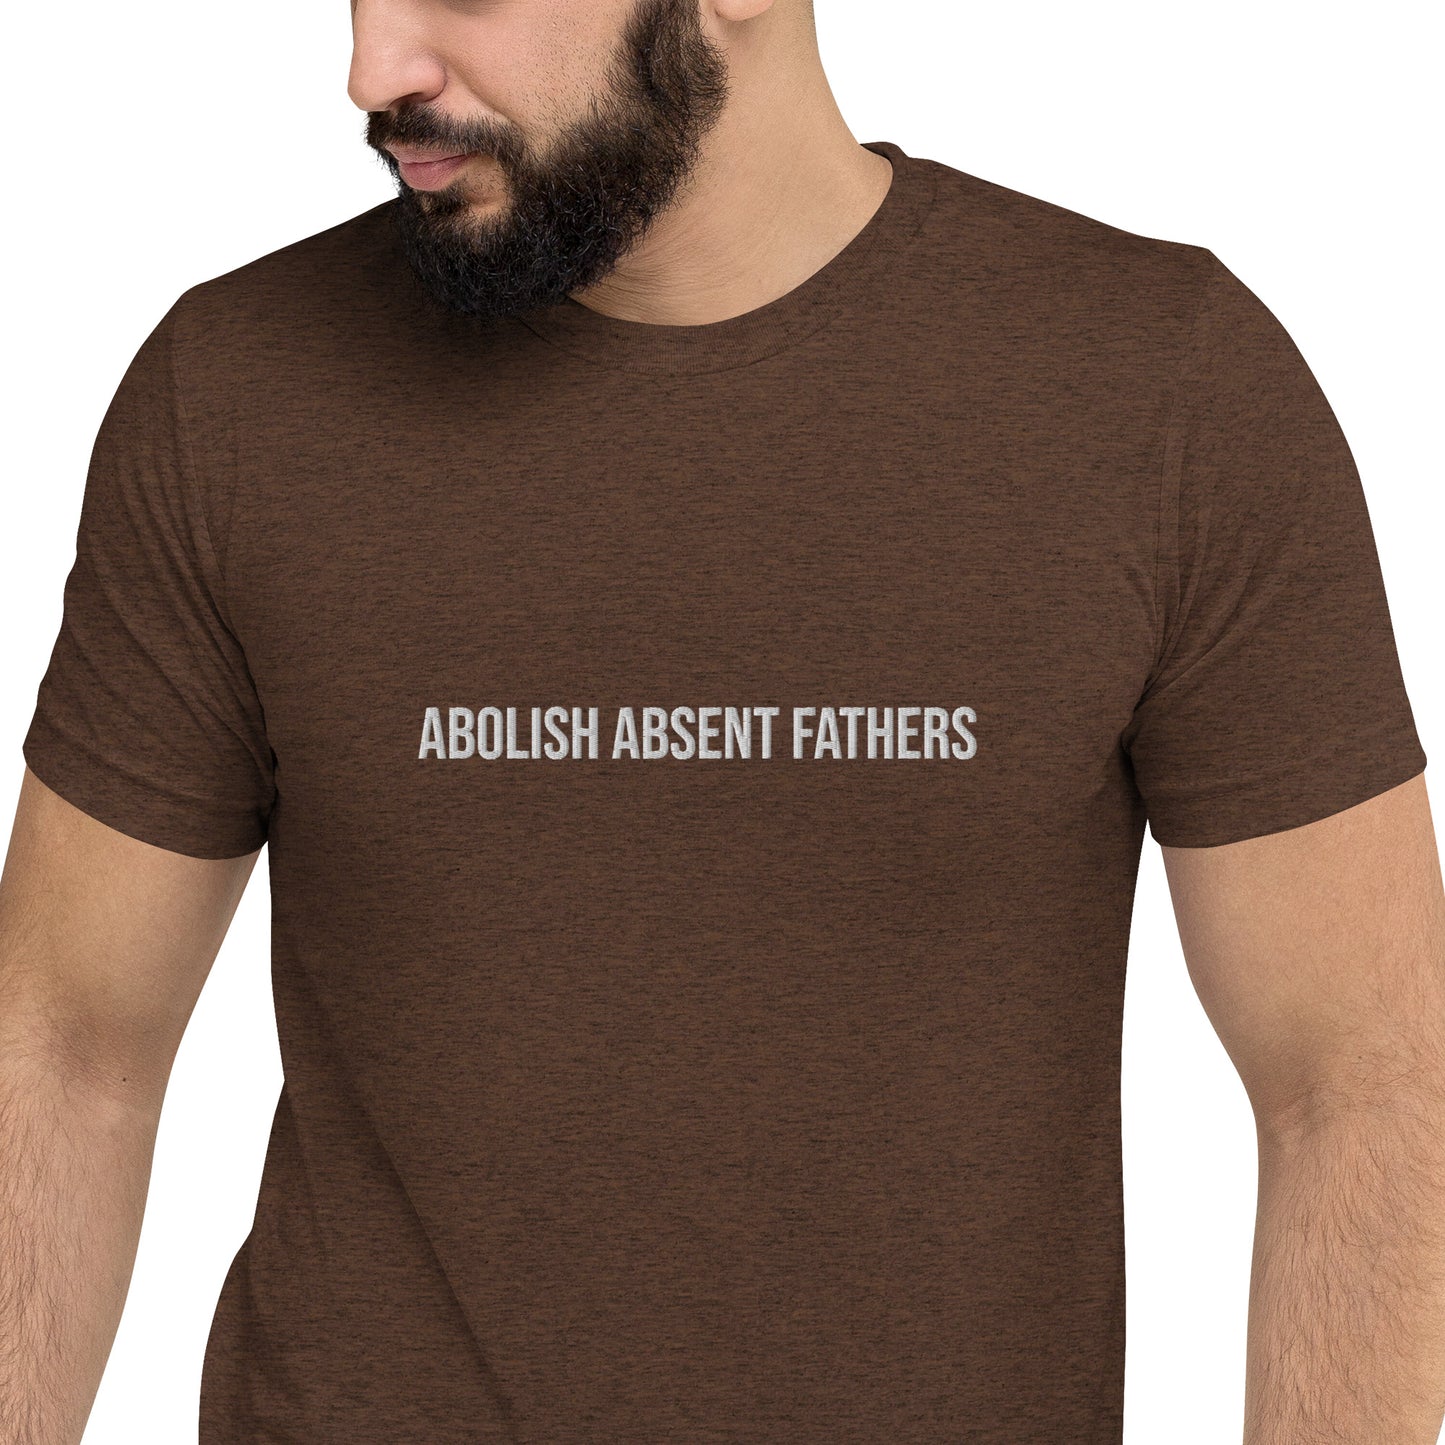 Abolish Absent Fathers Embroidered Unisex T-Shirt